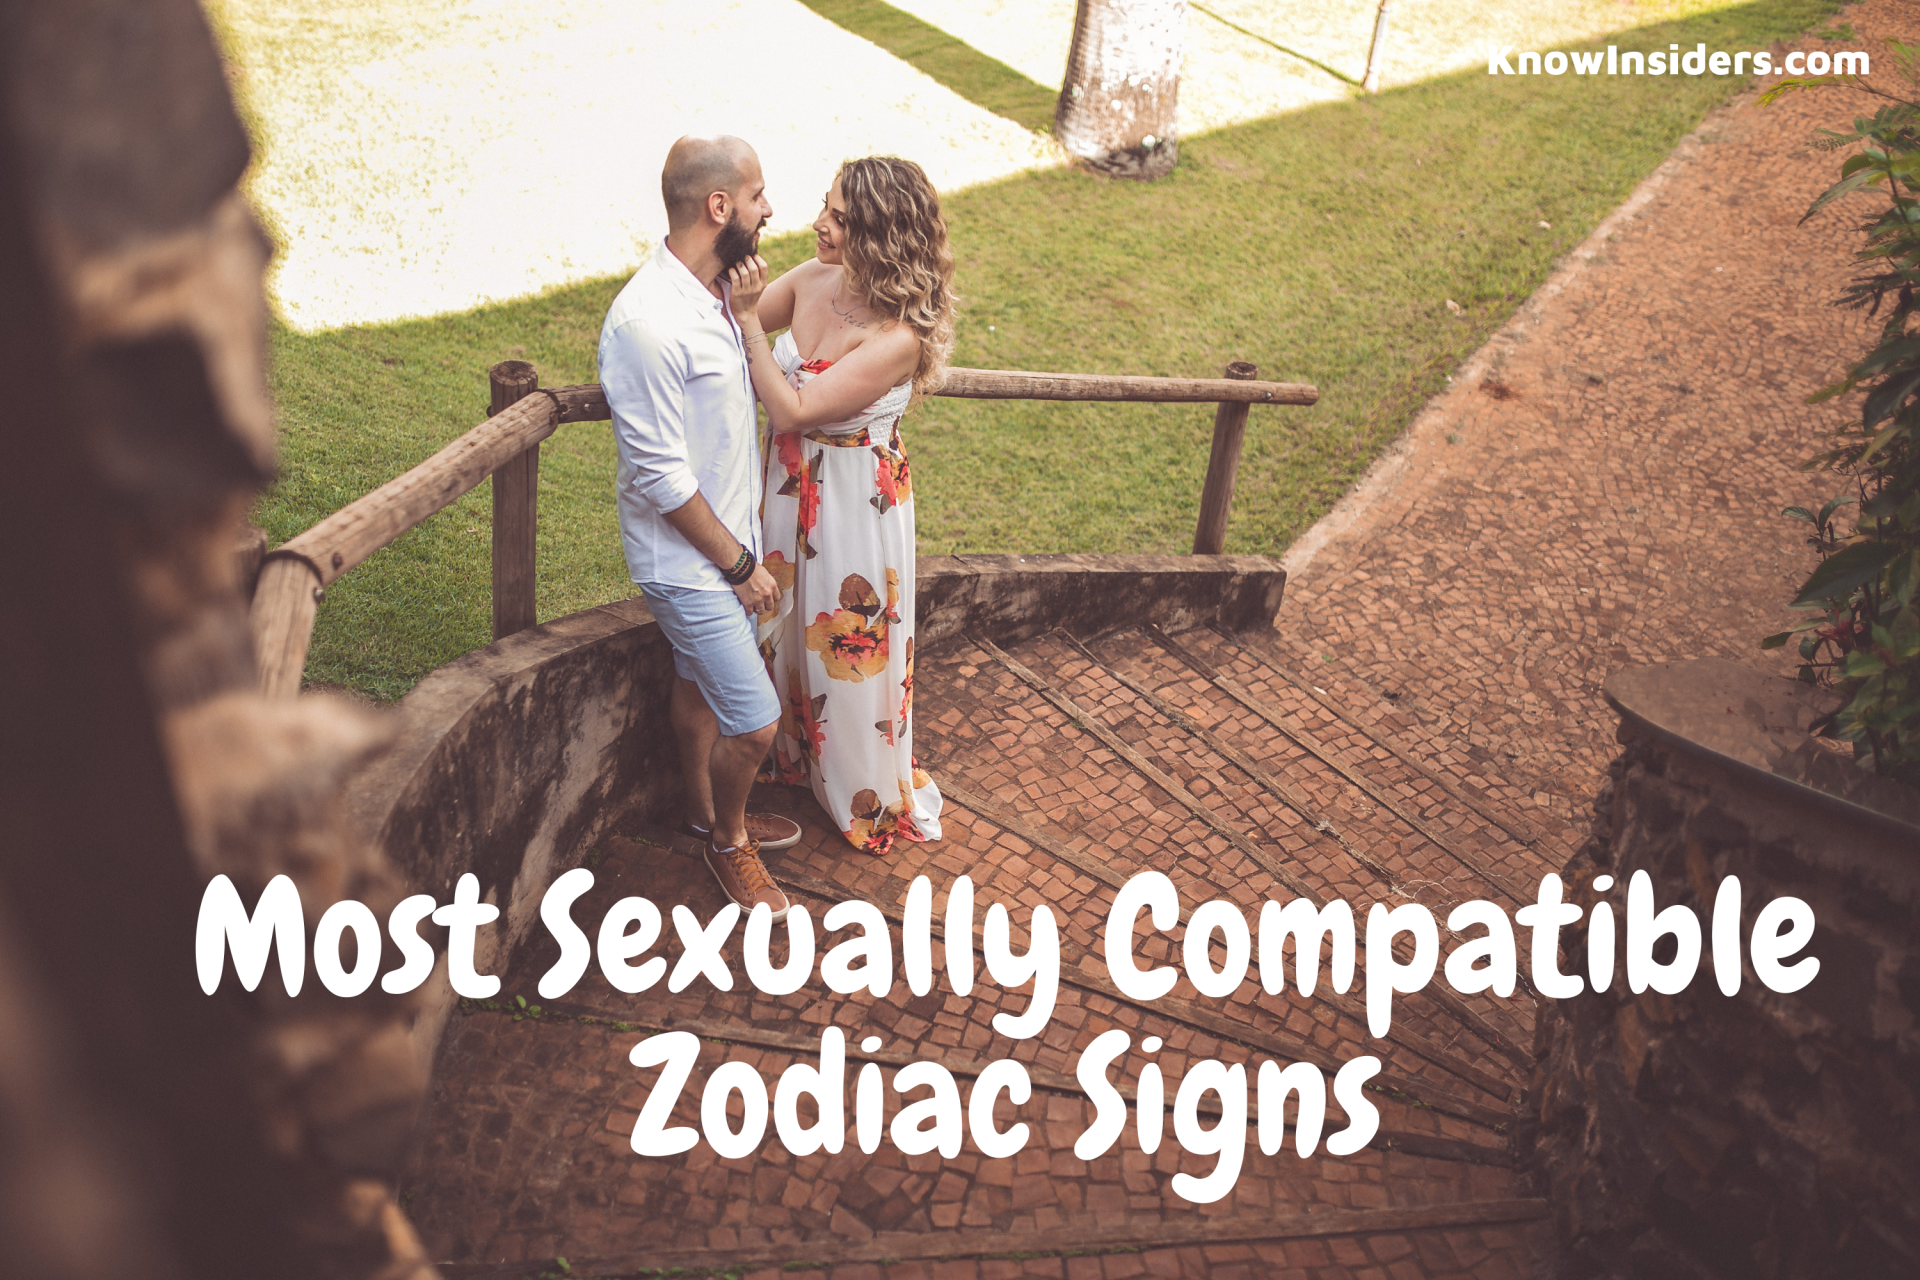 Most Sexually Compatible Zodiac Signs - According to Astrology